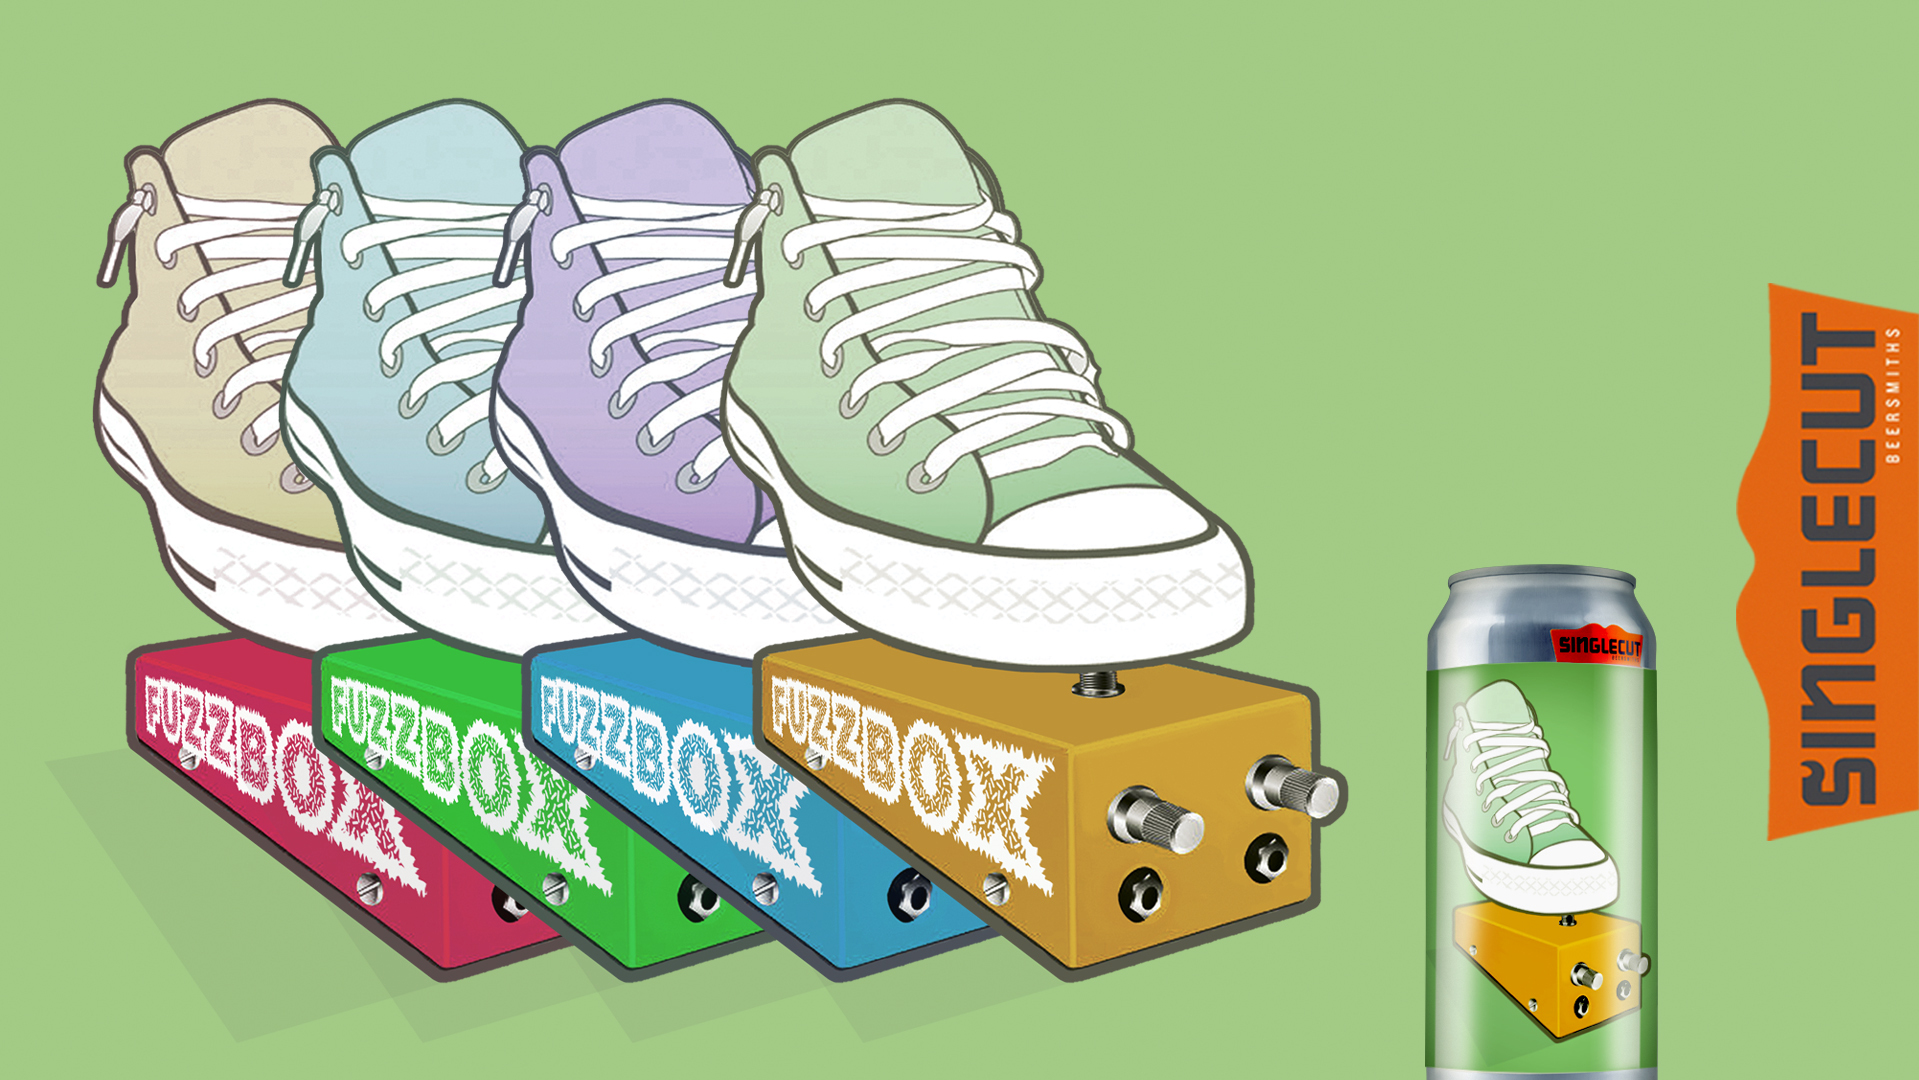 shoes of different colors stepping on a guitar pedal called Fuzzbox with a can of beer